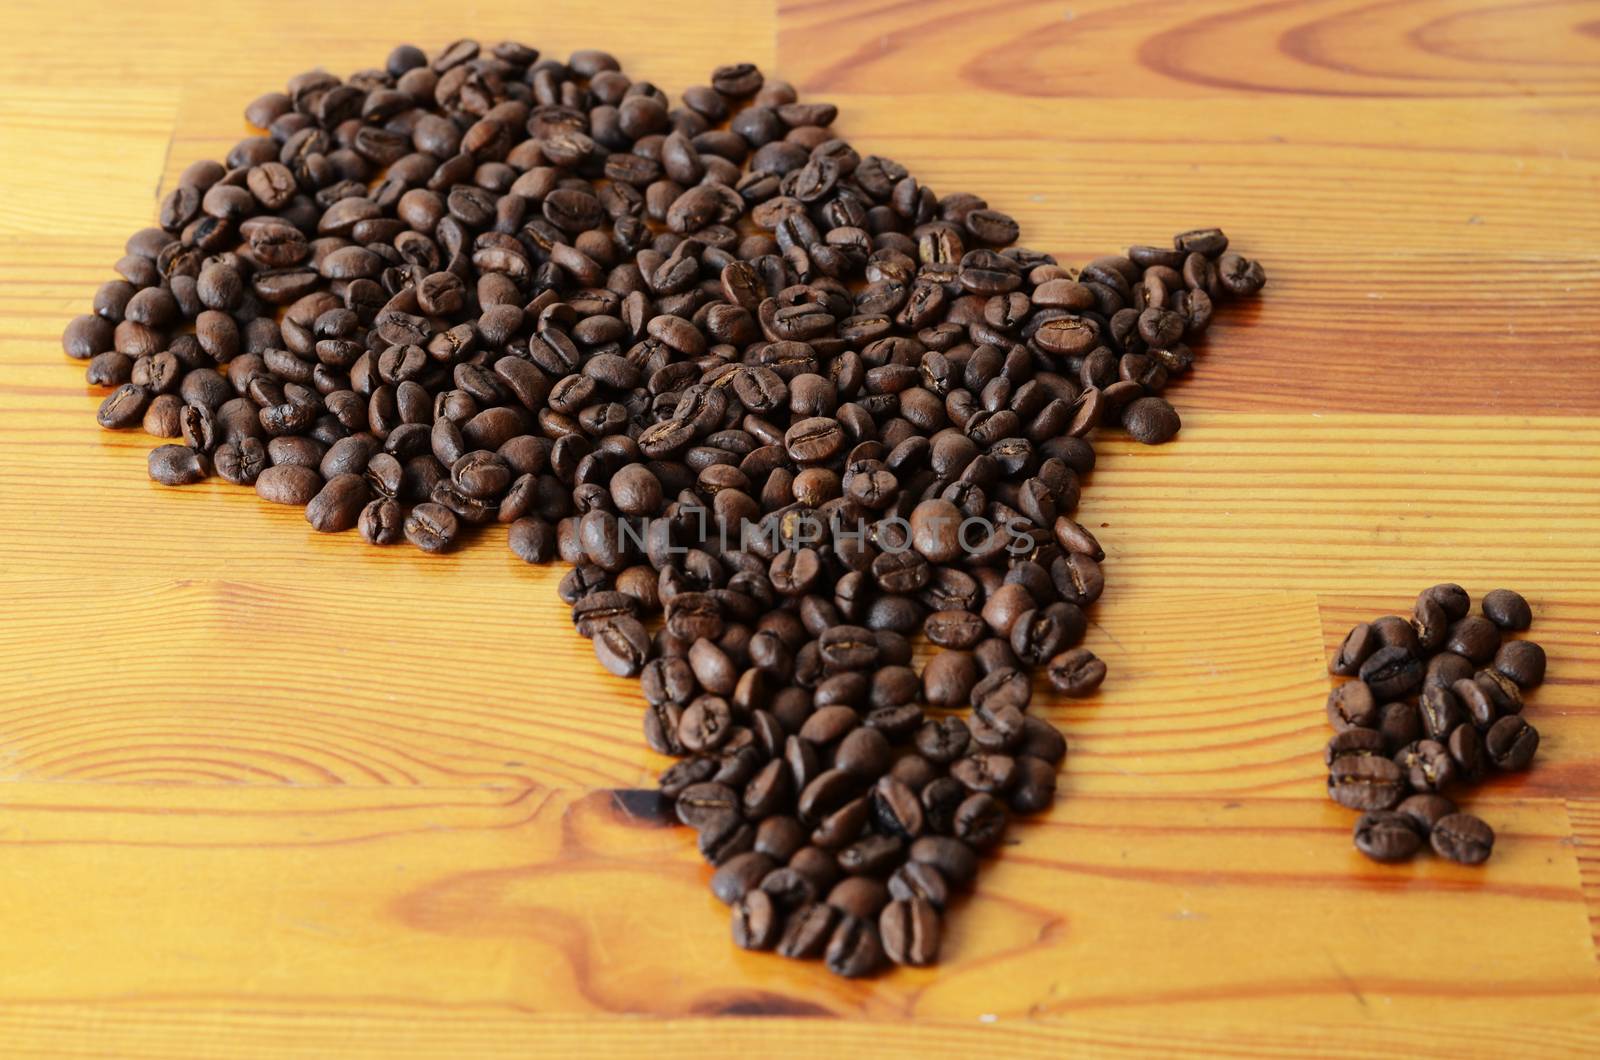 africa symbol made of coffee by sarkao